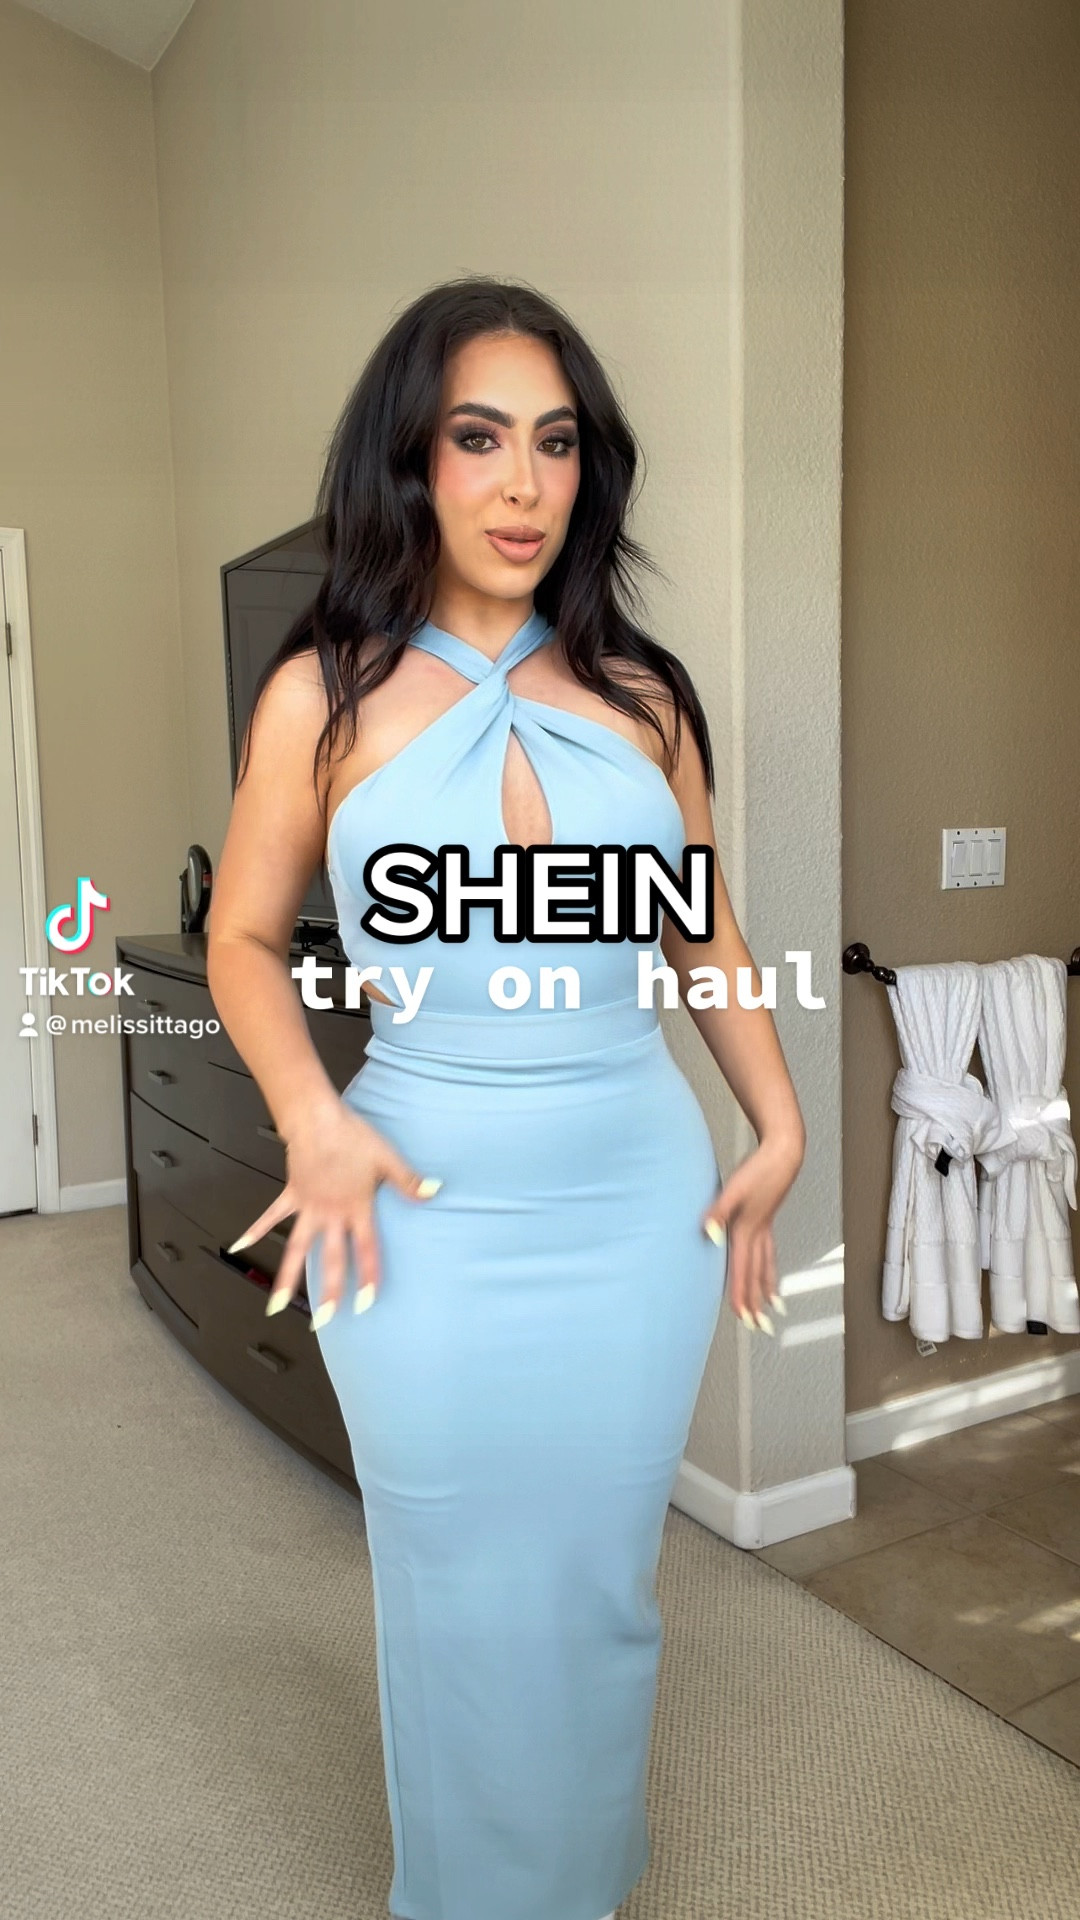 SHEIN on X: Feeling confident and blue-tiful! 💙 IG